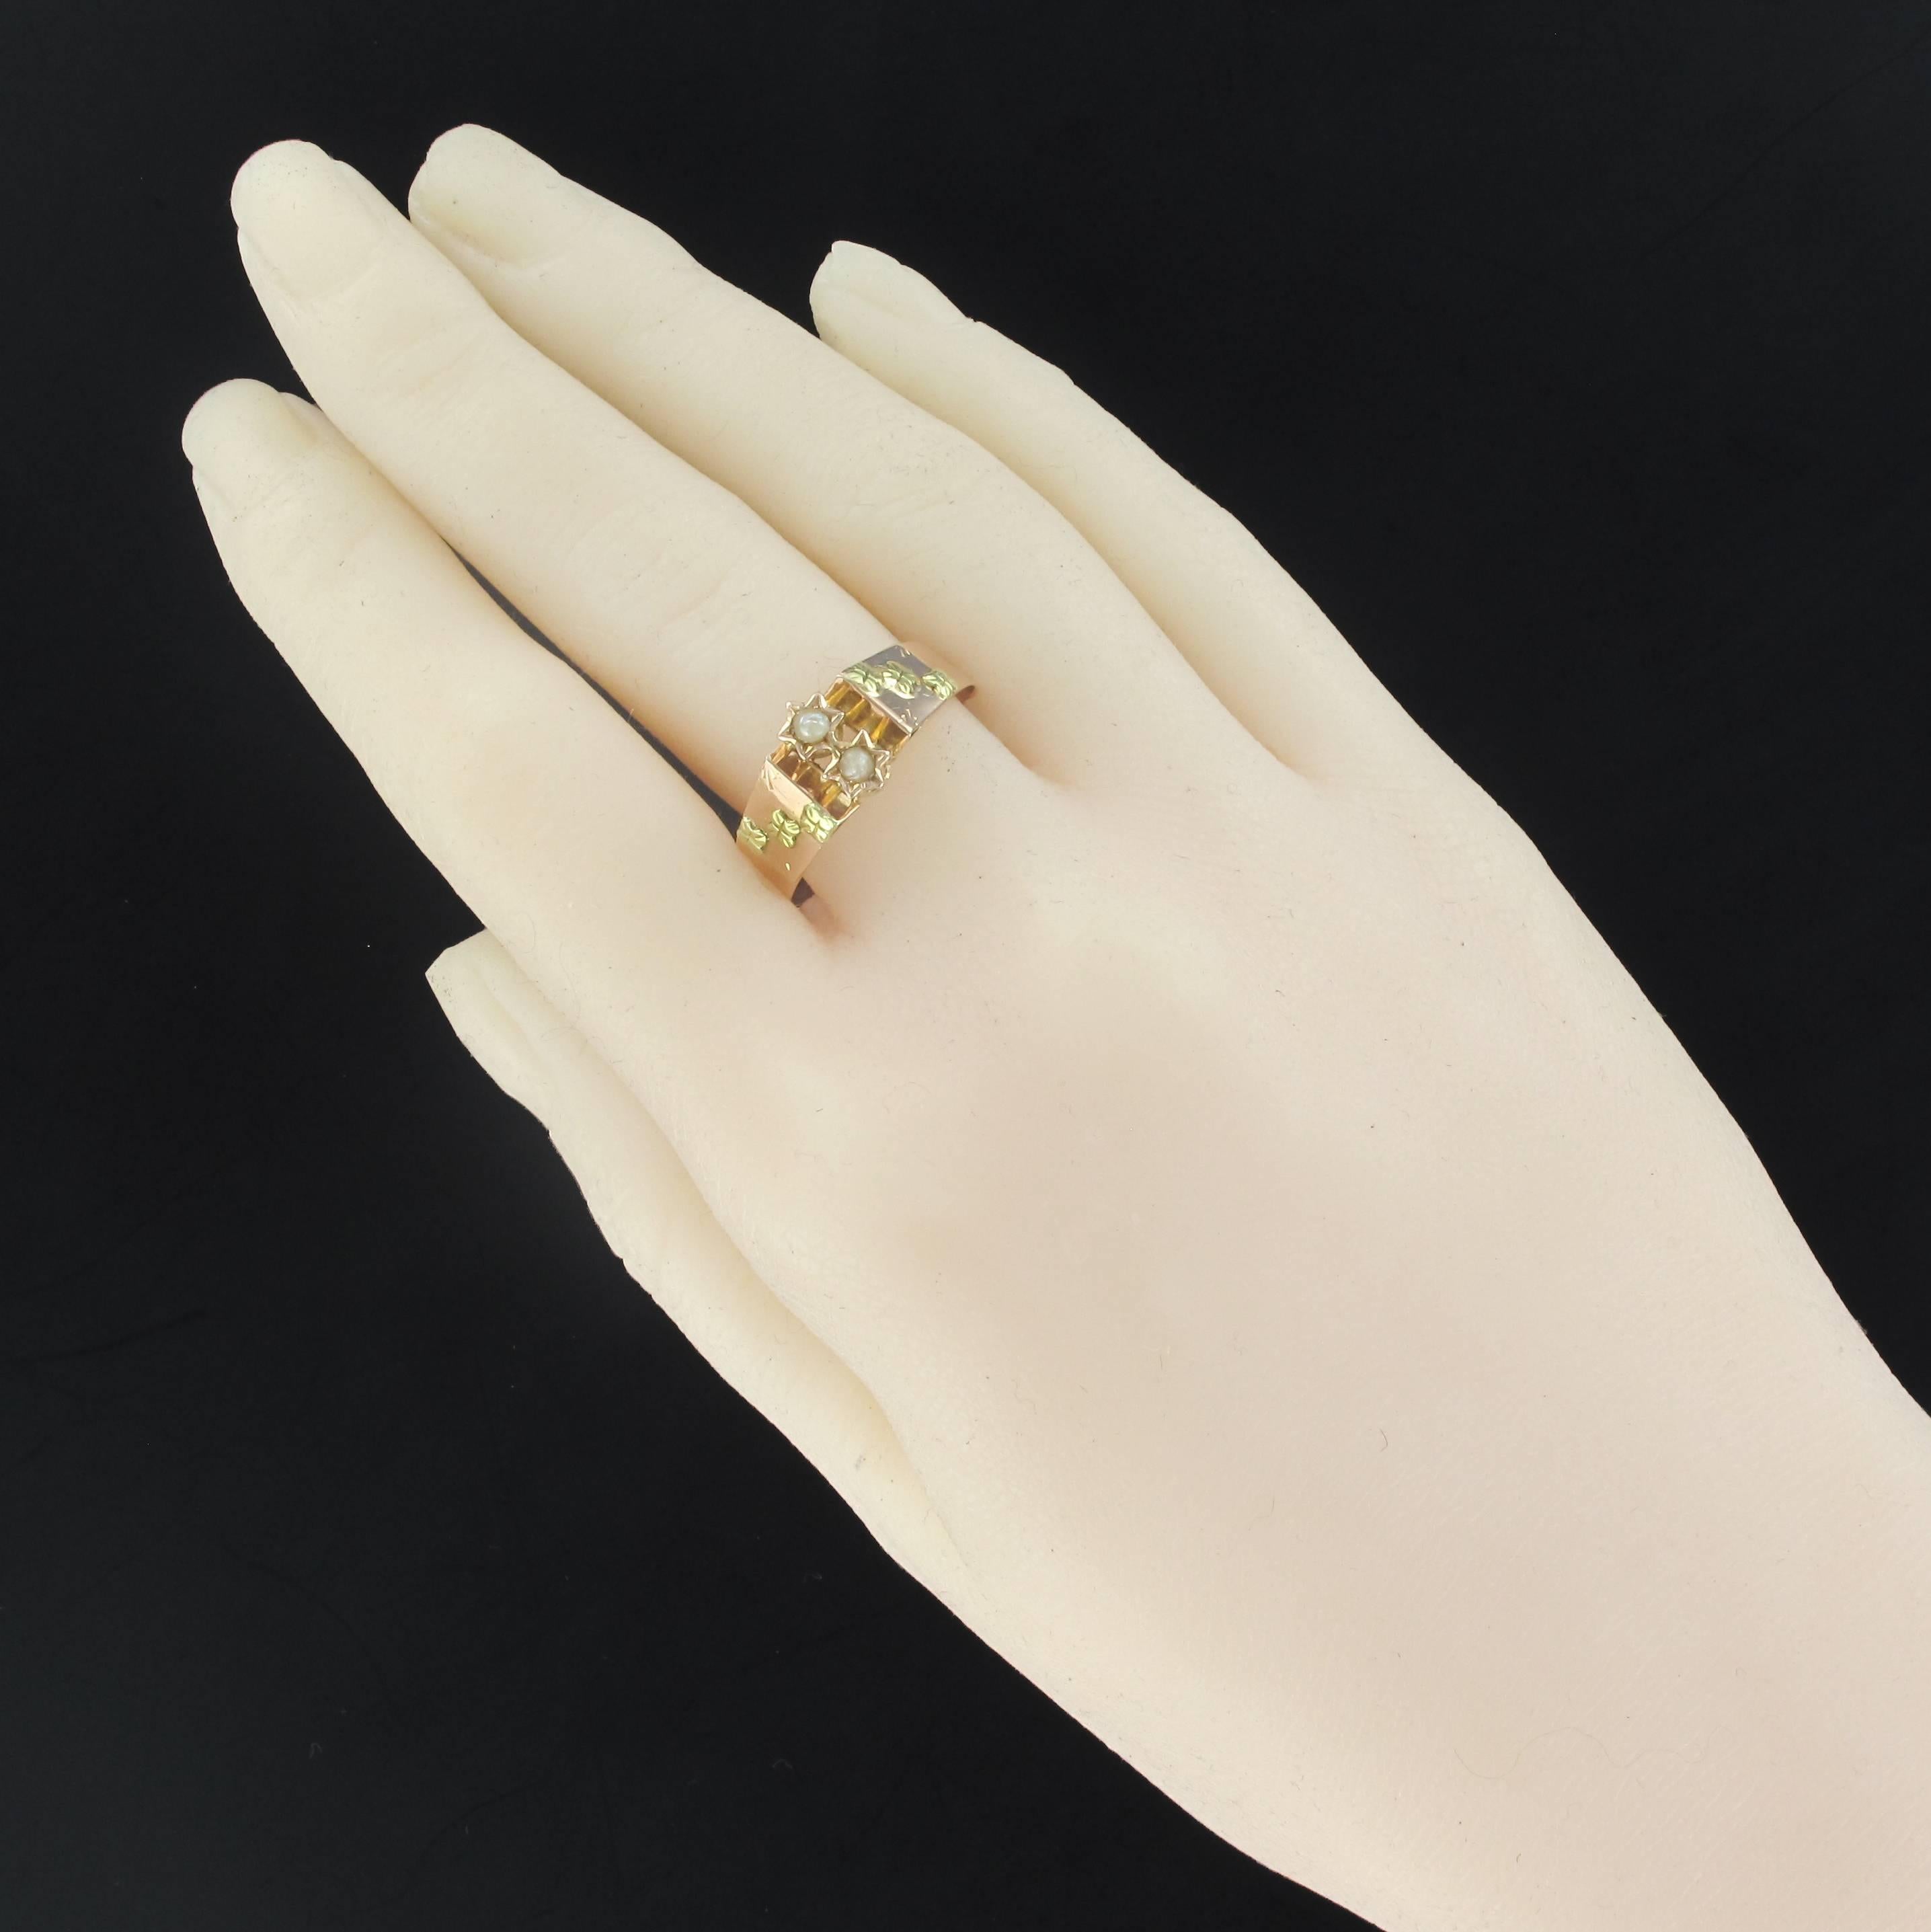 Ring in 18 carats rose and green gold, horse's head hallmark.
This beautiful antique ring is set on its top with 2 half natural pearls star set. On both sides, the start of the ring is set with 3 green gold flowers.
Height: 8.9 mm, width: 18.6 mm,